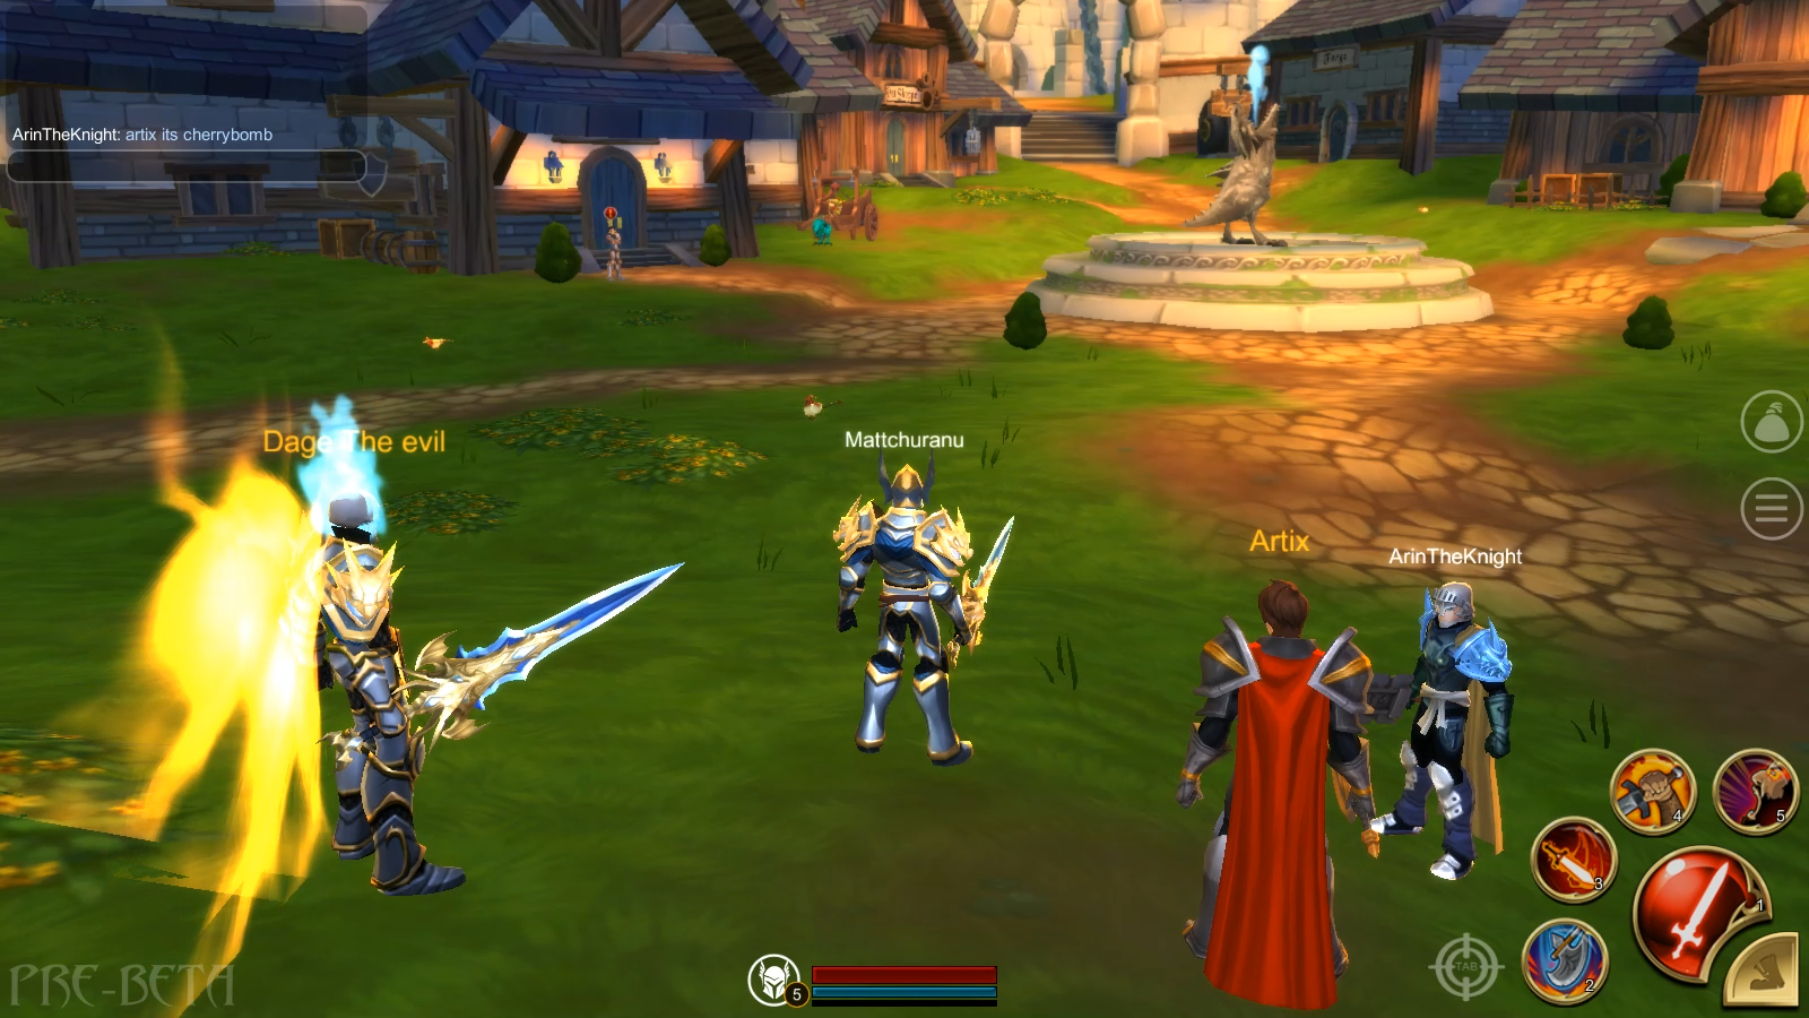 About: Adventure Quest 3D MMO RPG (iOS App Store version)